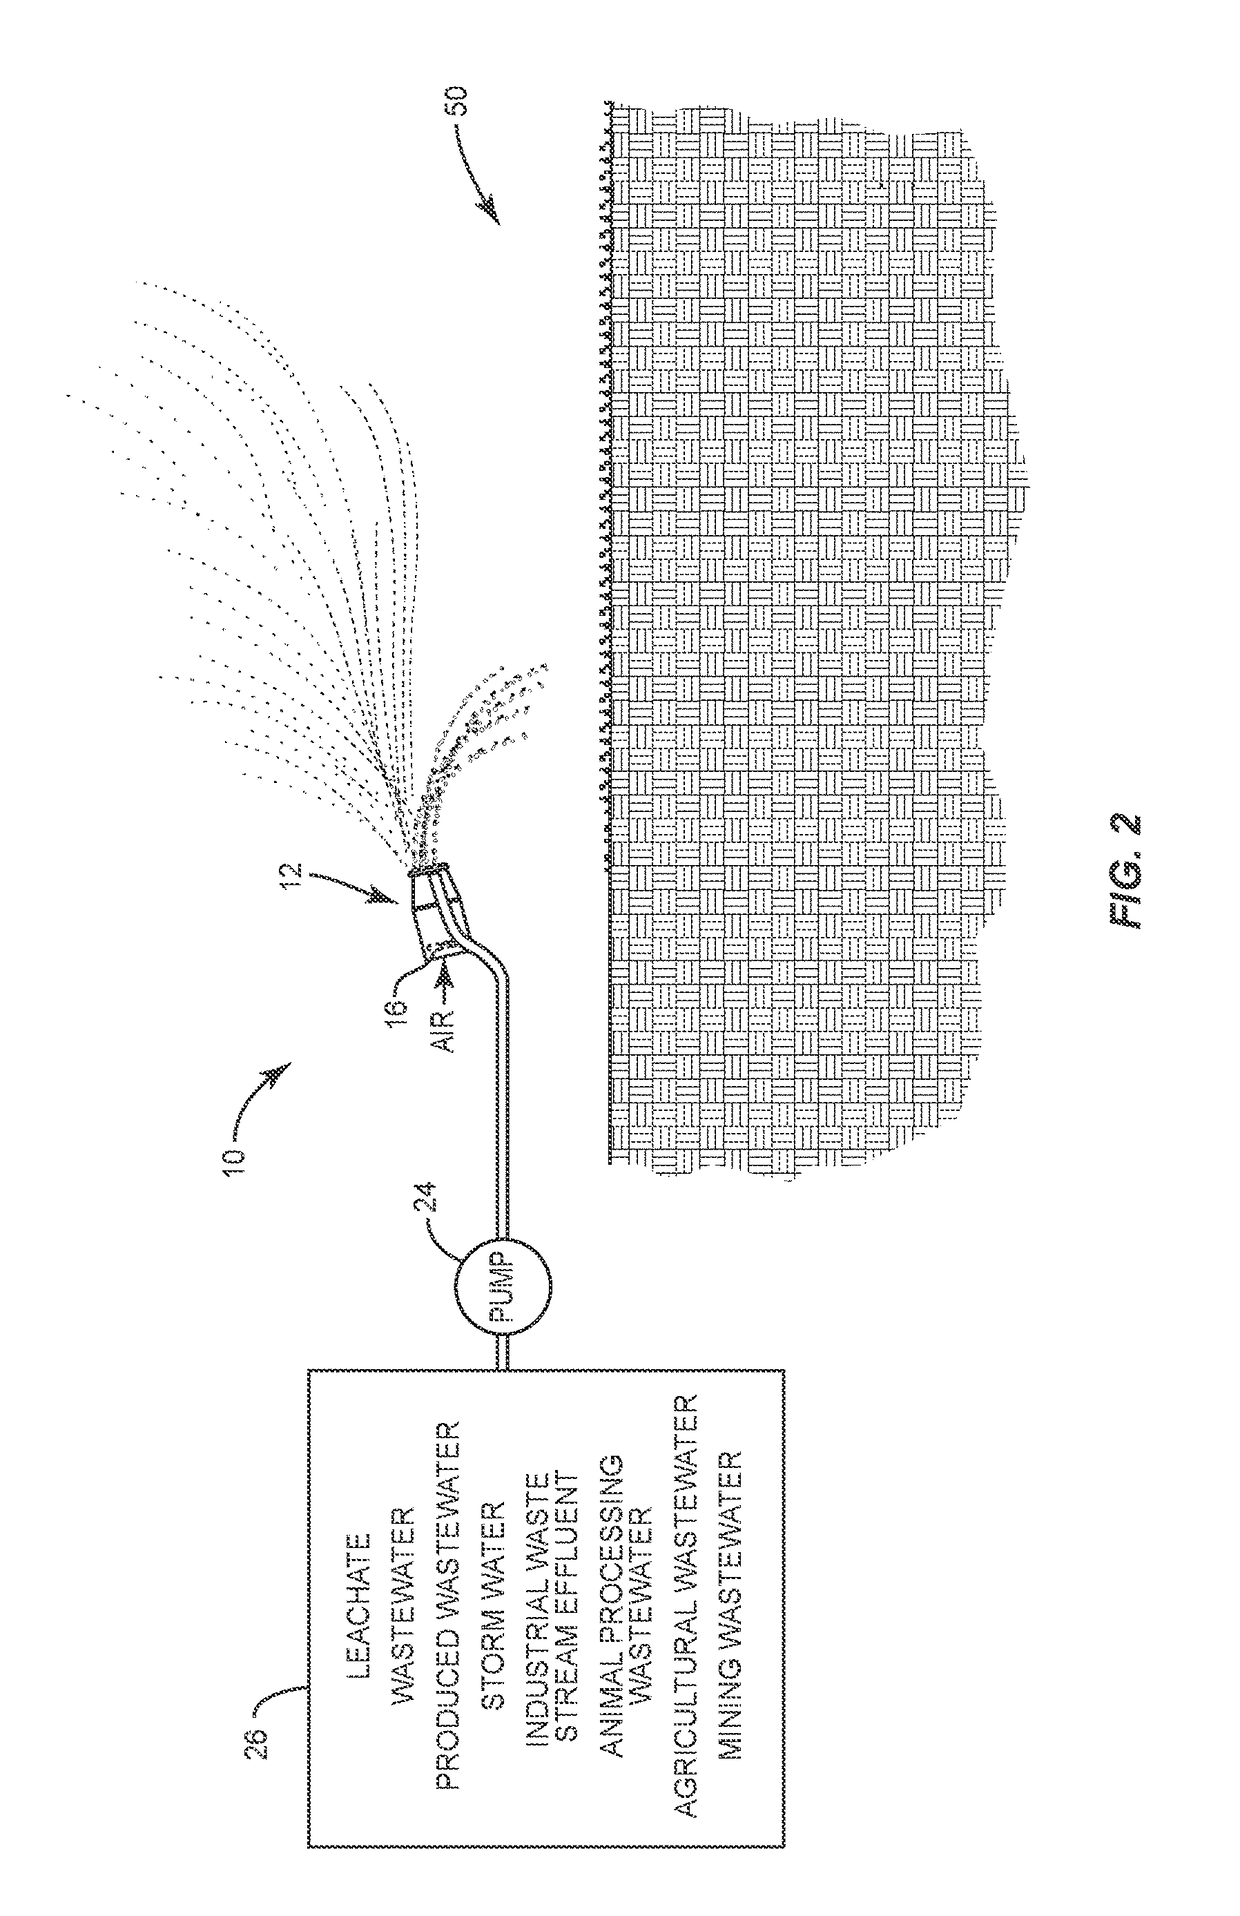 Method for on-site aerial dissemination and atmospheric disposal or “aerosolization” of the water component of all leachates and wastewaters